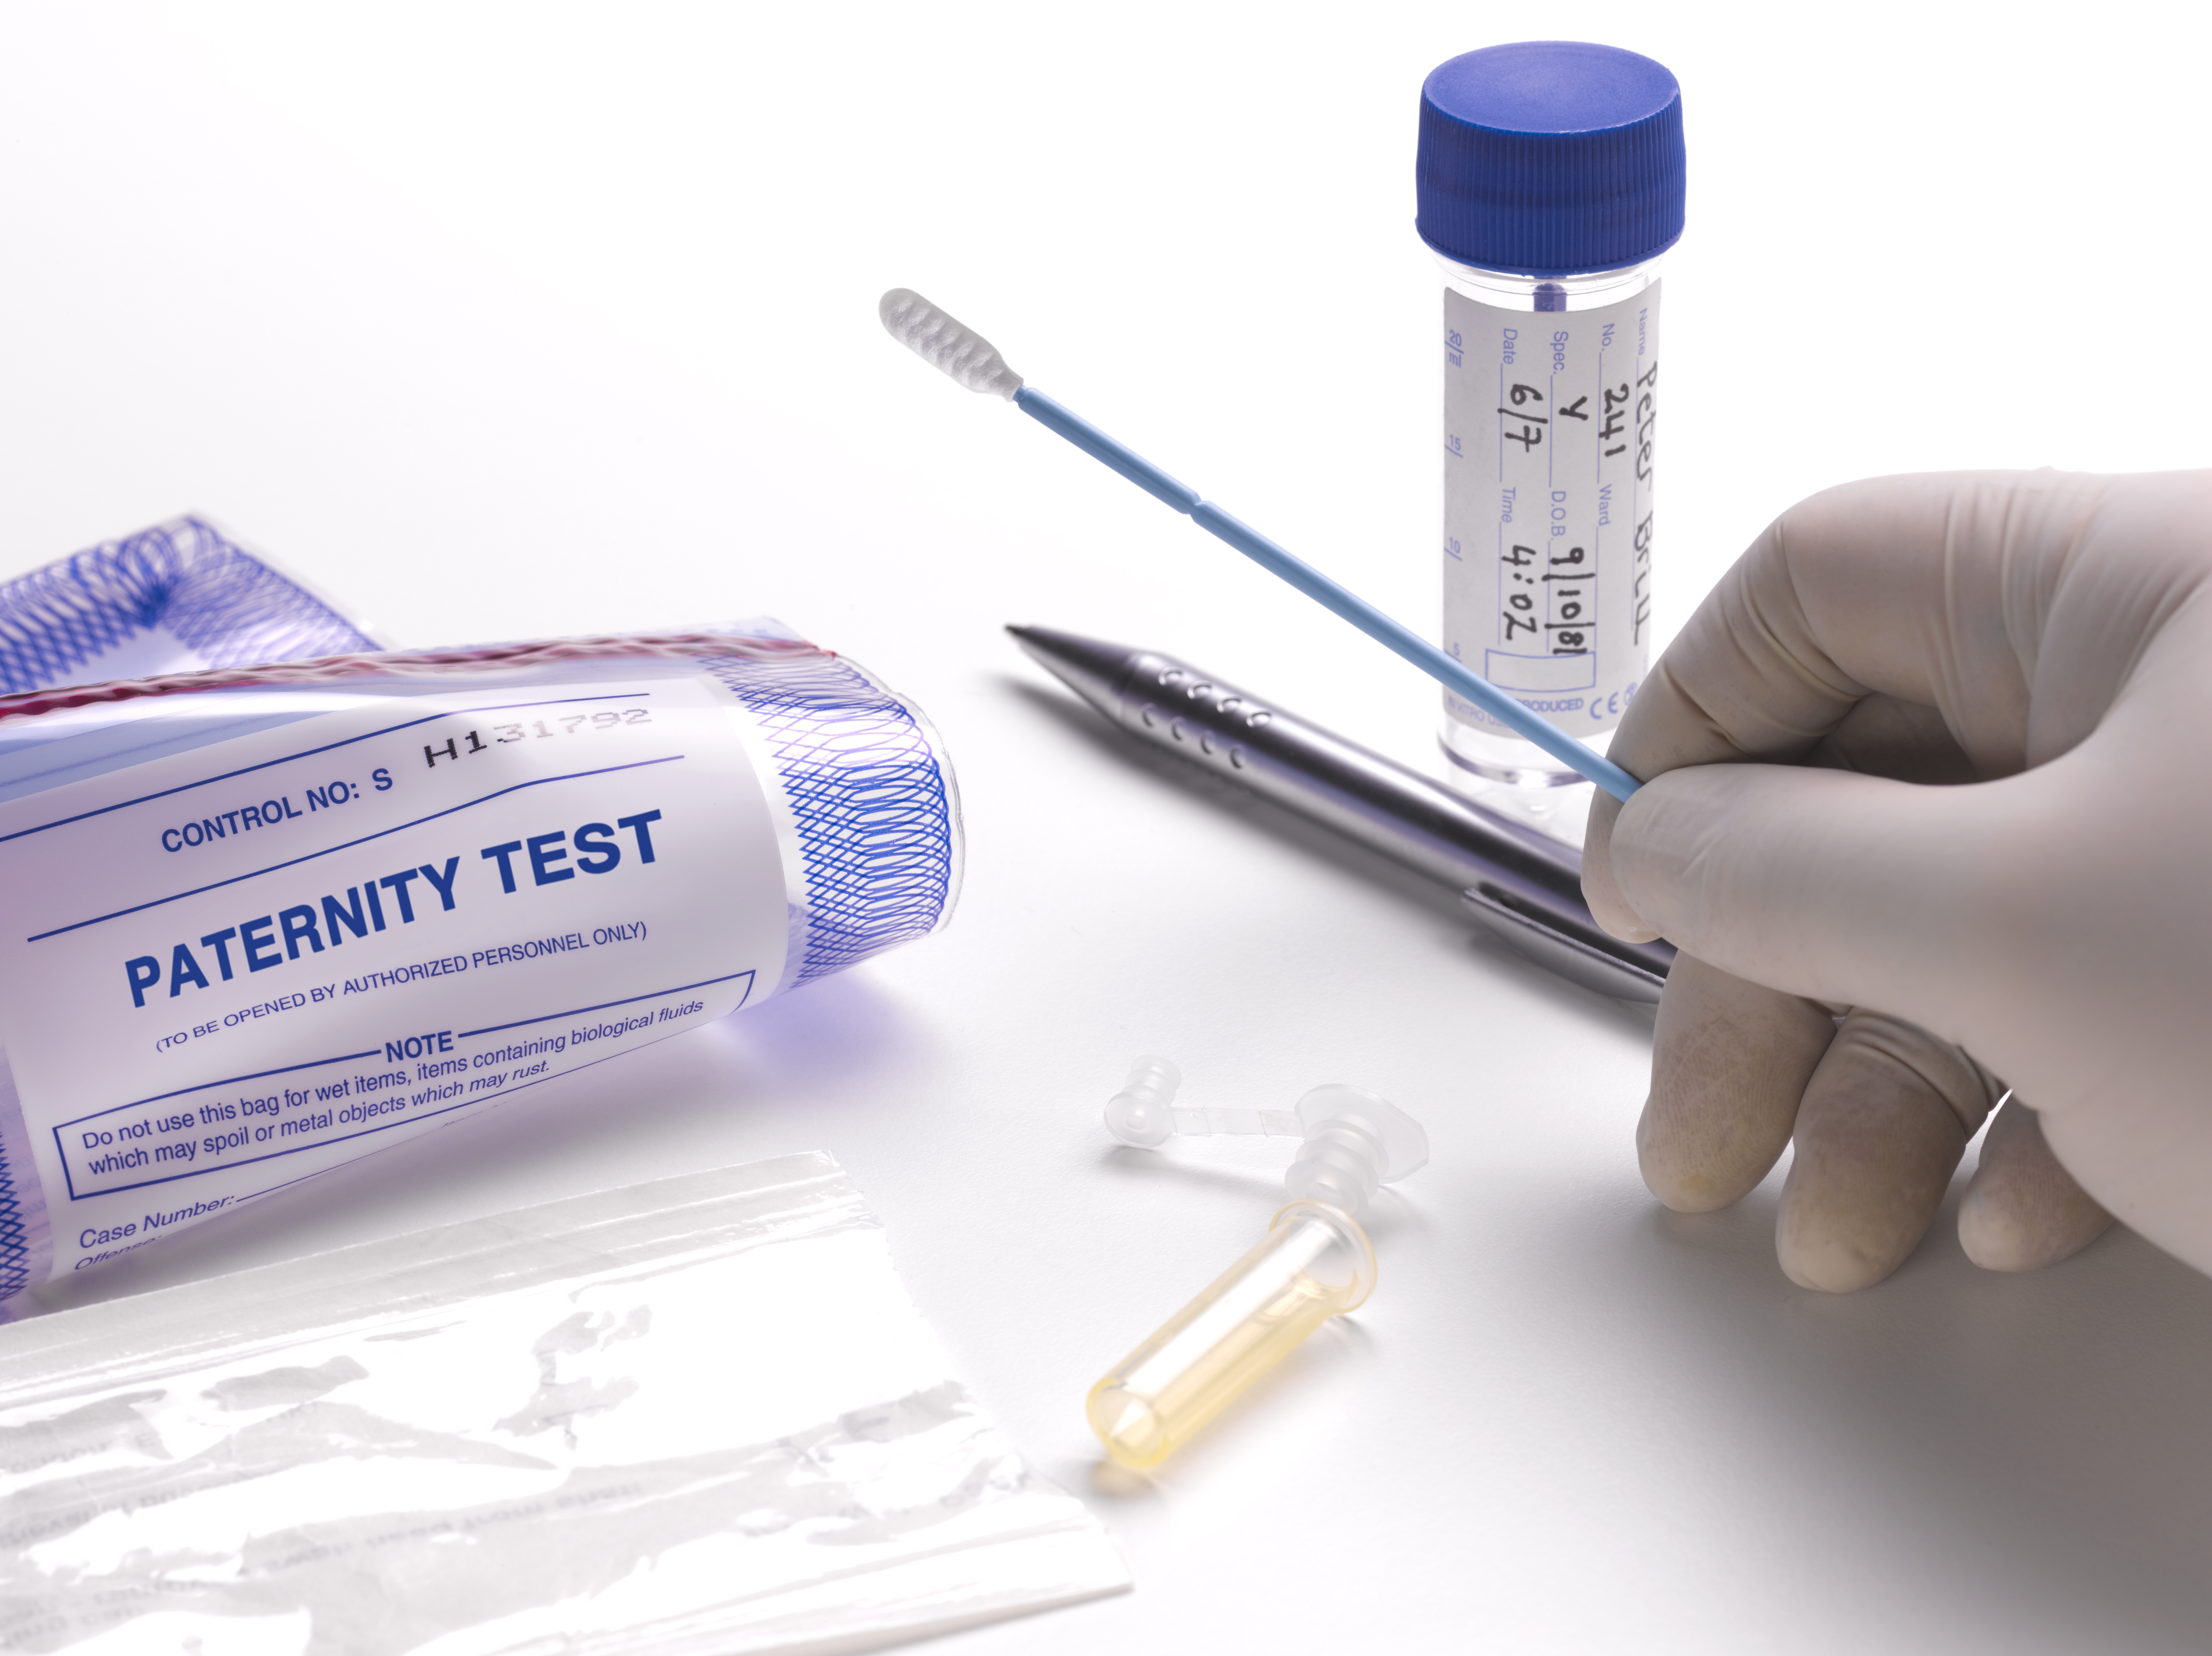 Taking DNA swab for paternity test | Source: Getty Images